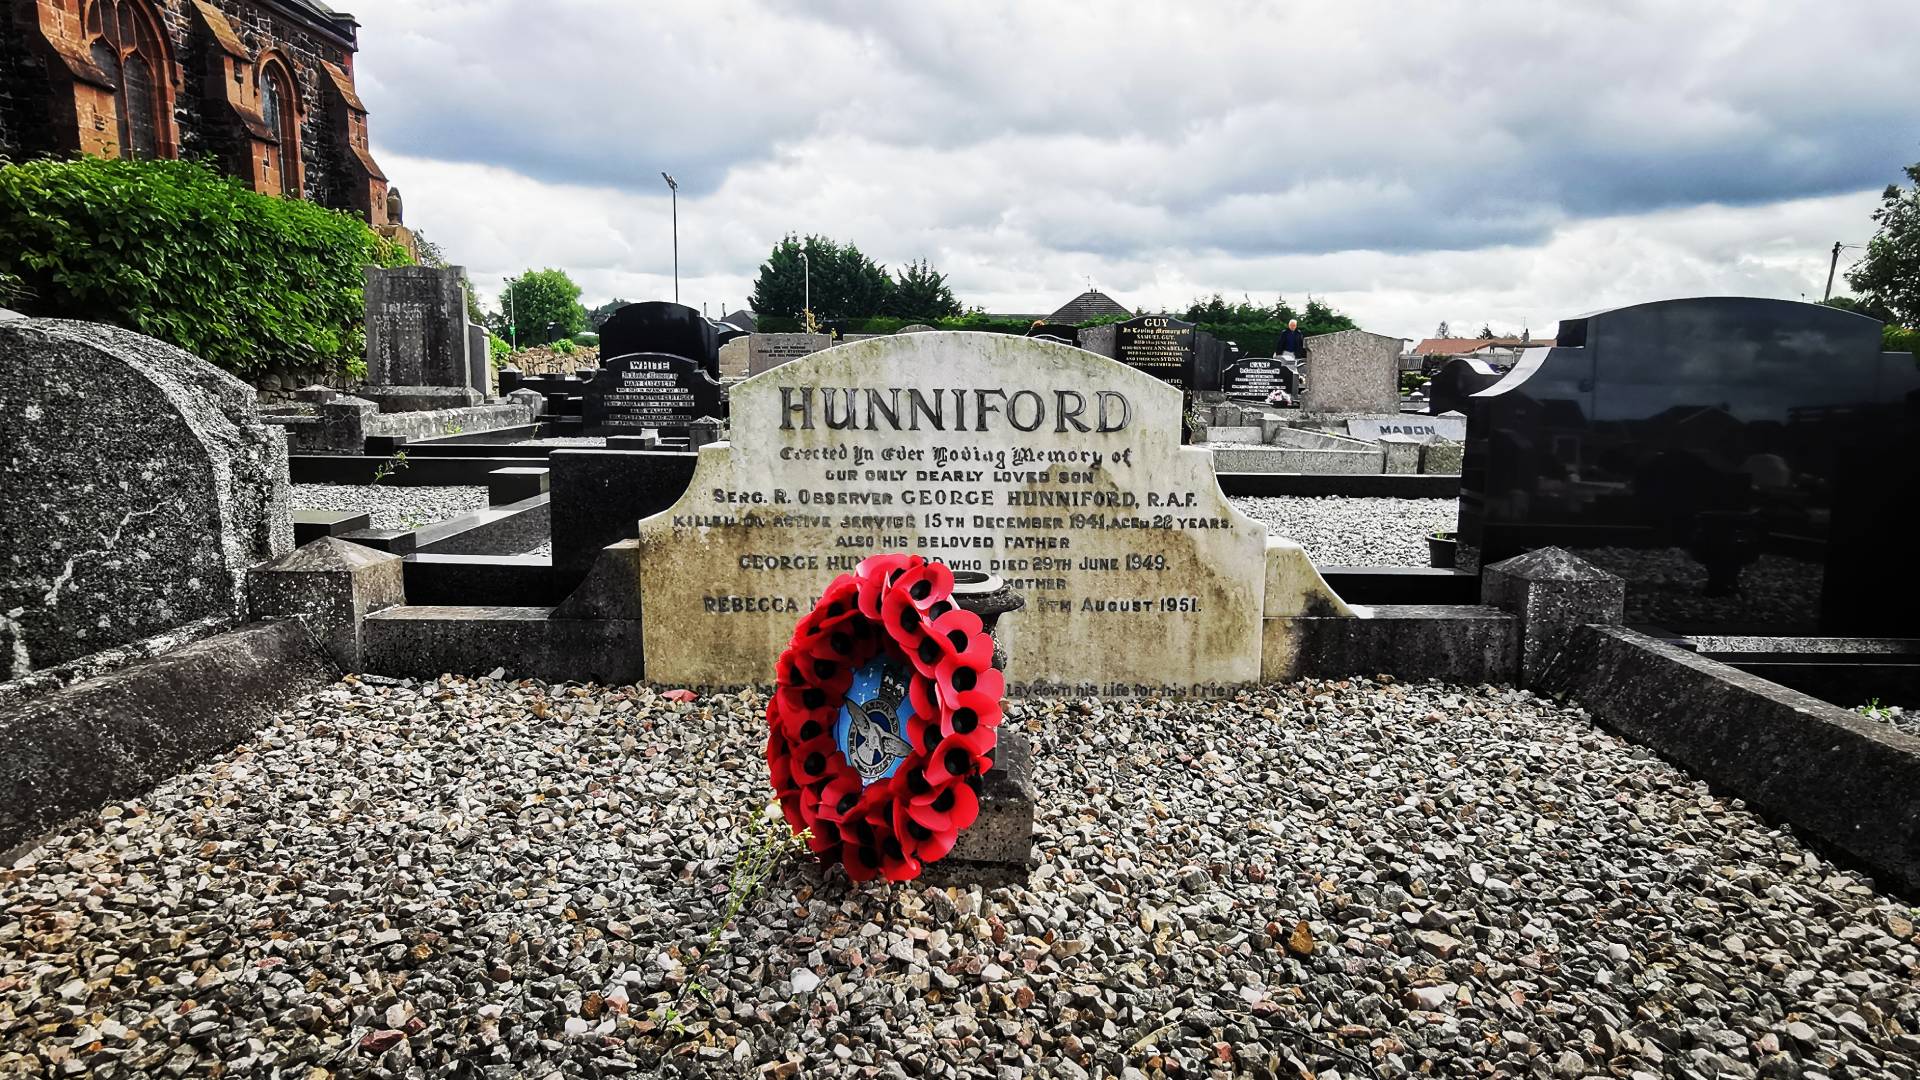 A family headstone marks the grave of Sergeant George Hunniford in Seagoe (St. Gobhan's) Church of Ireland Churchyard, Portadown, Co. Armagh.